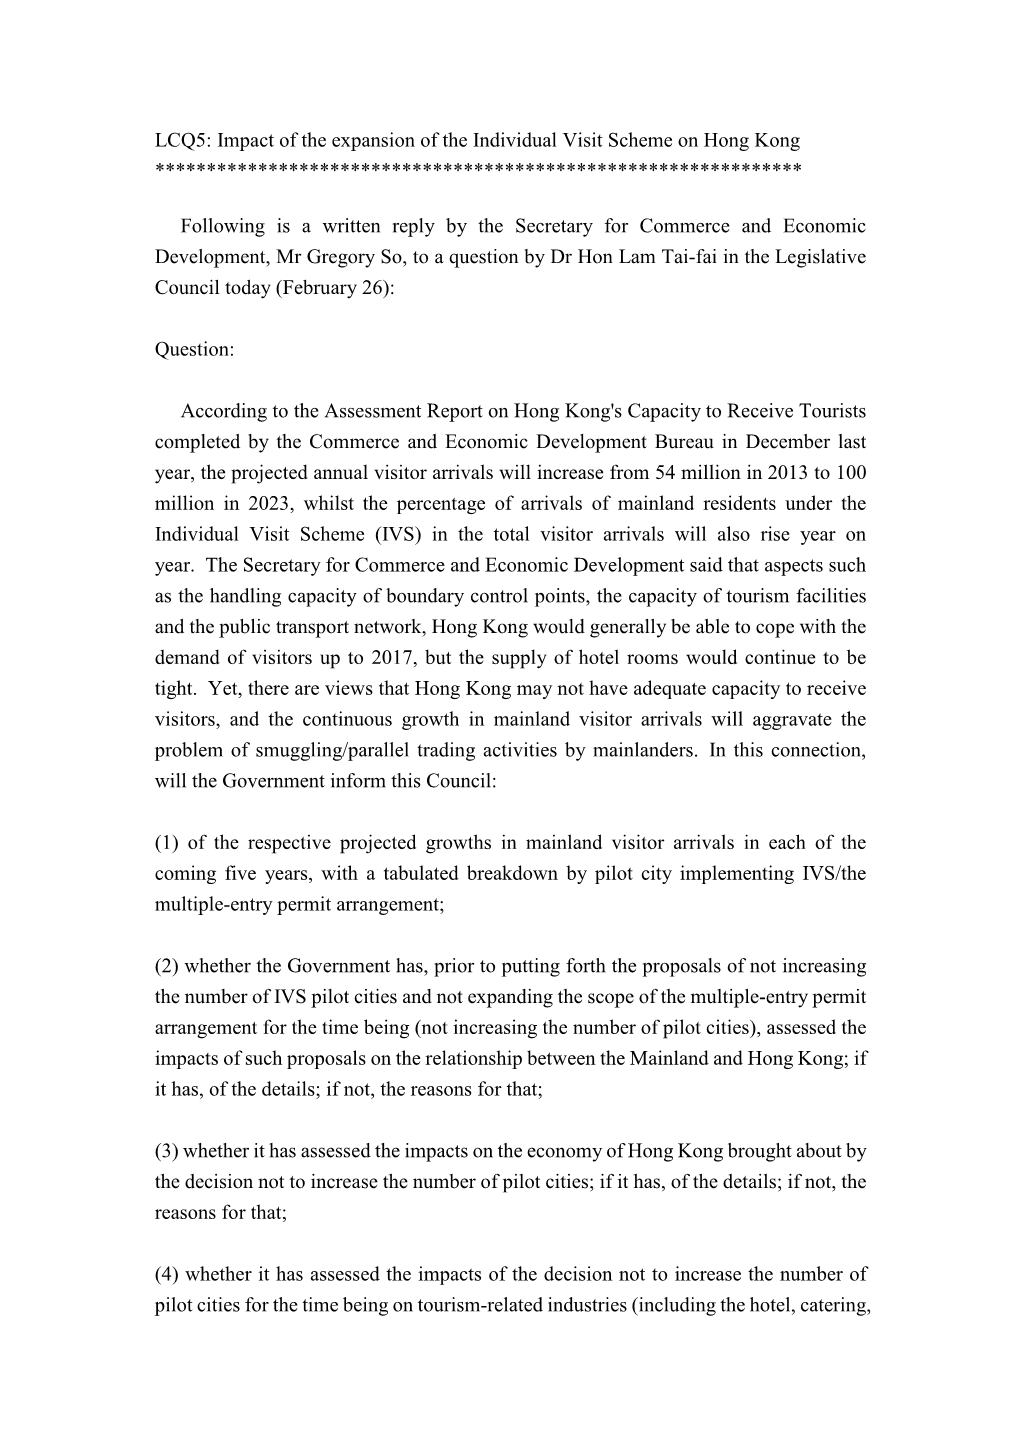 LCQ5: Impact of the Expansion of the Individual Visit Scheme on Hong Kong ***************************************************************